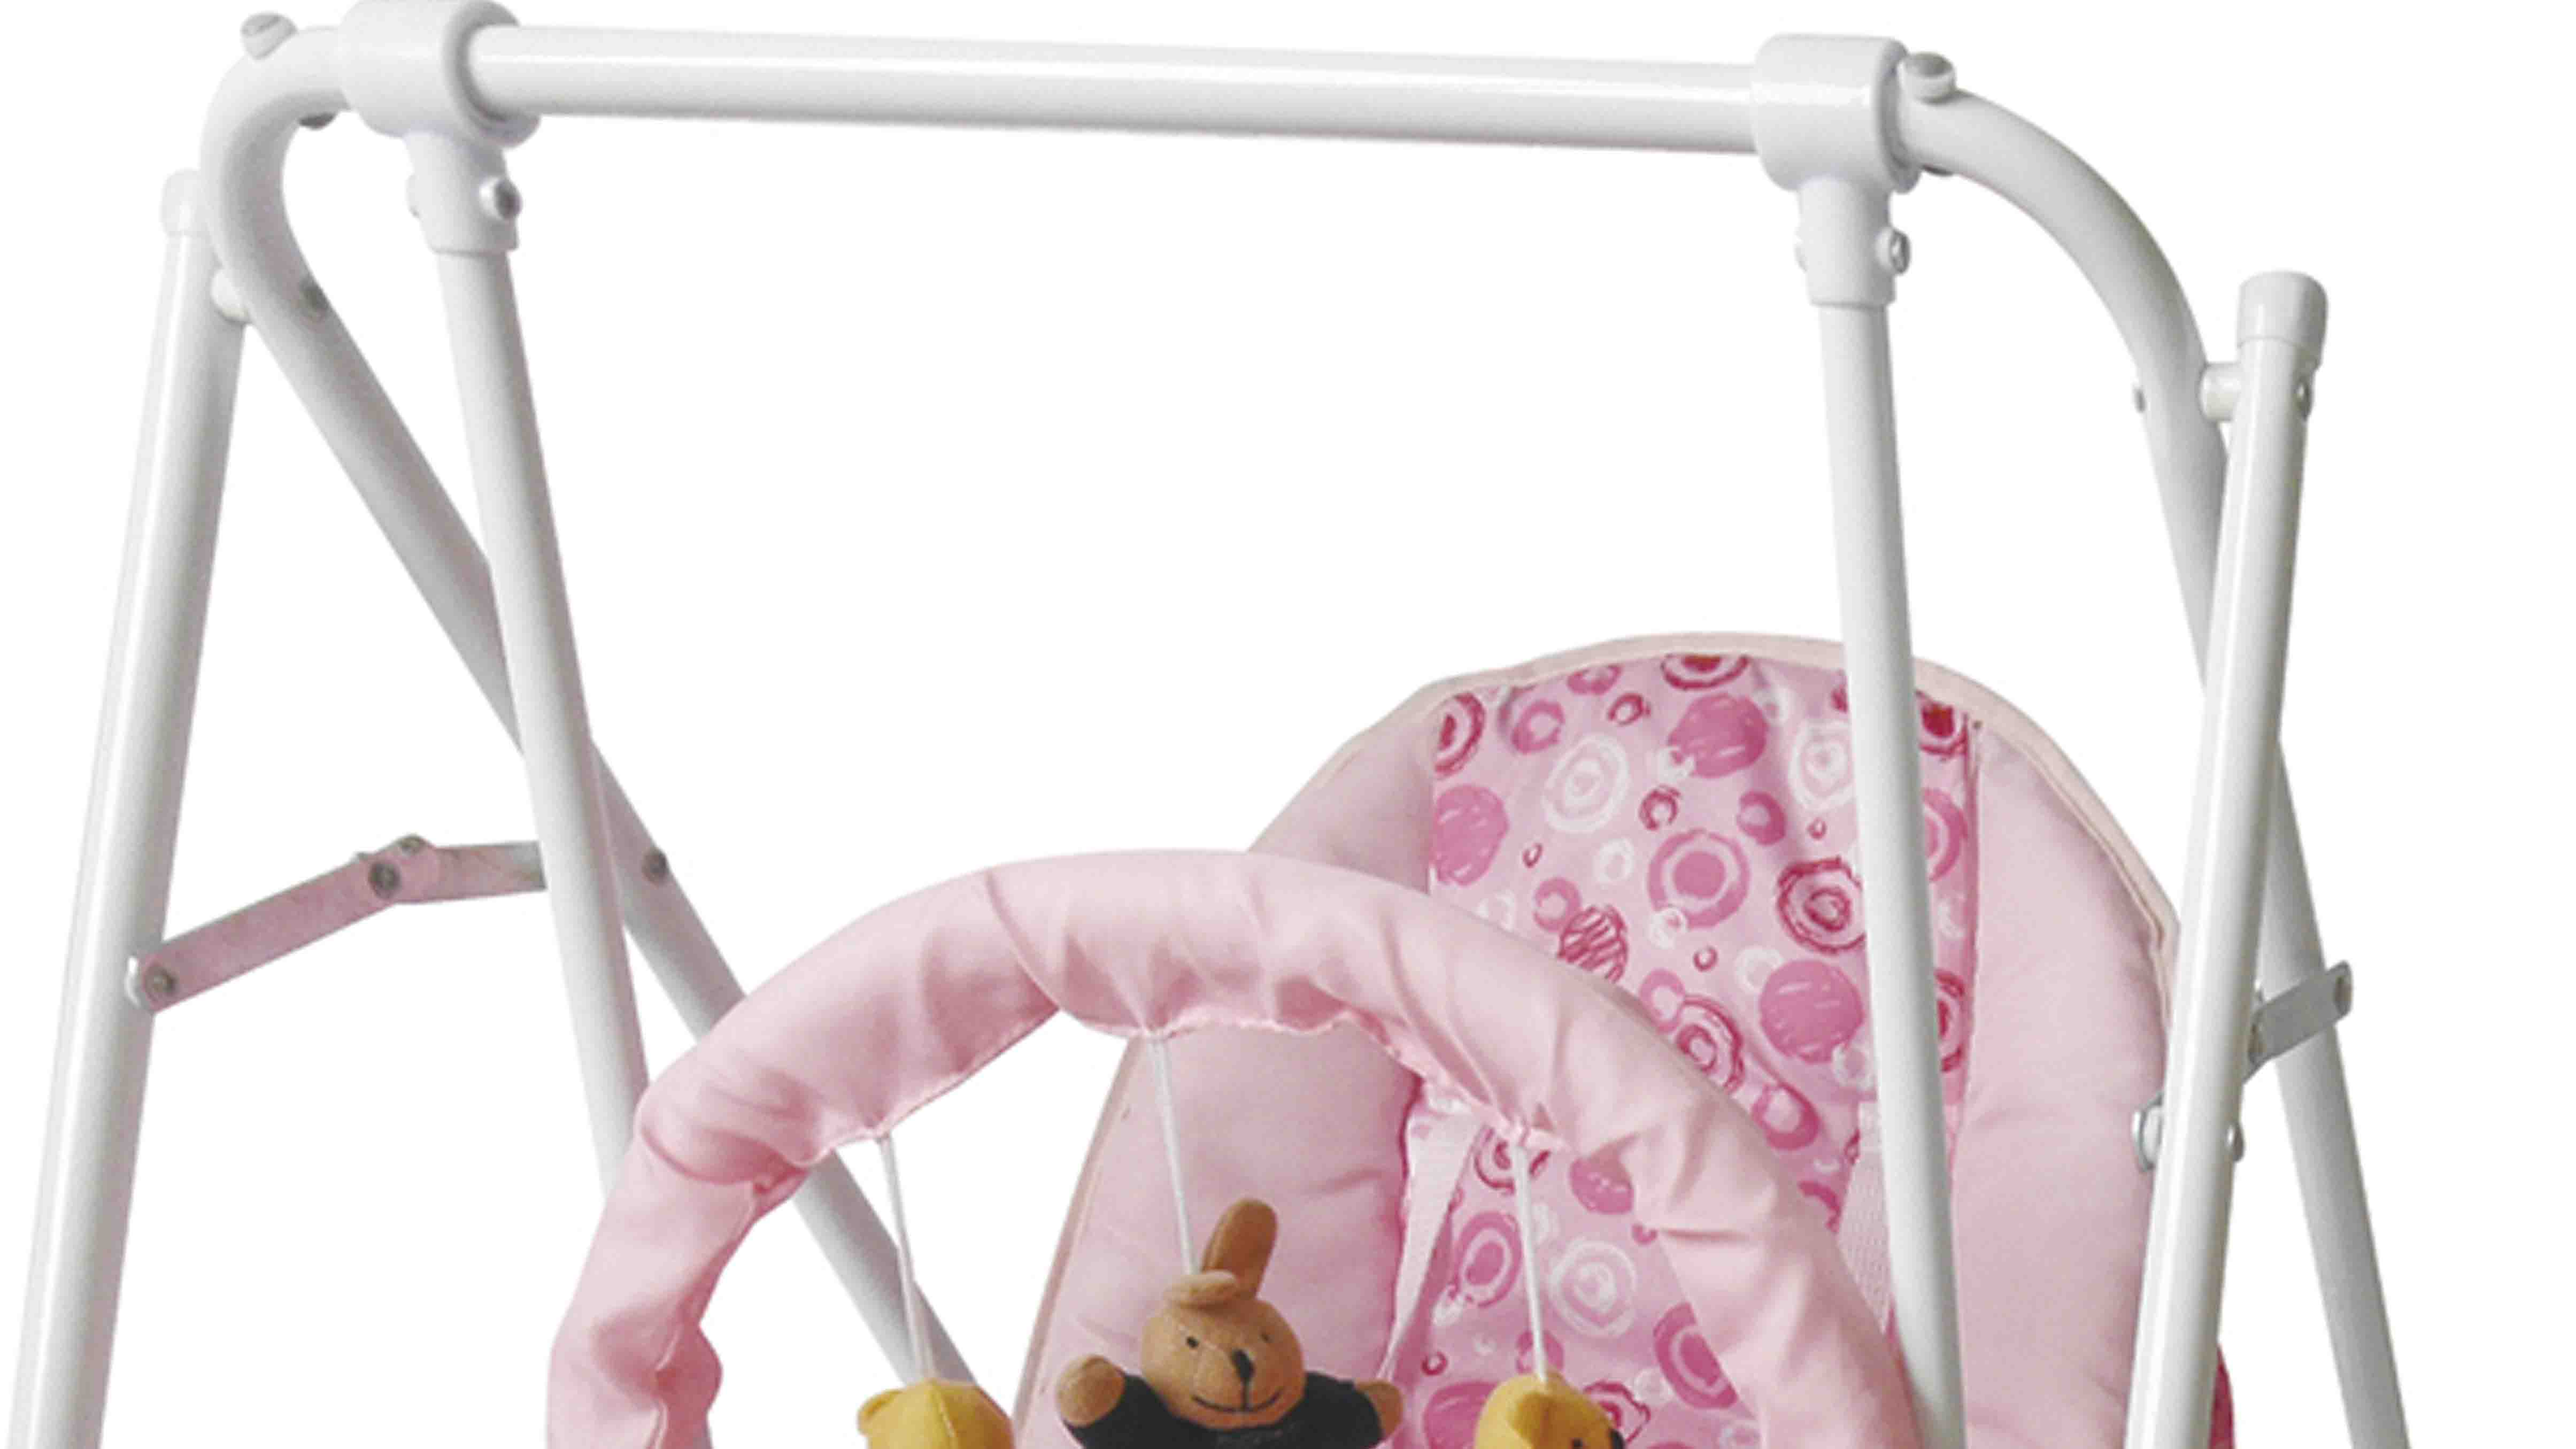 double seat upright baby swing factory for kids